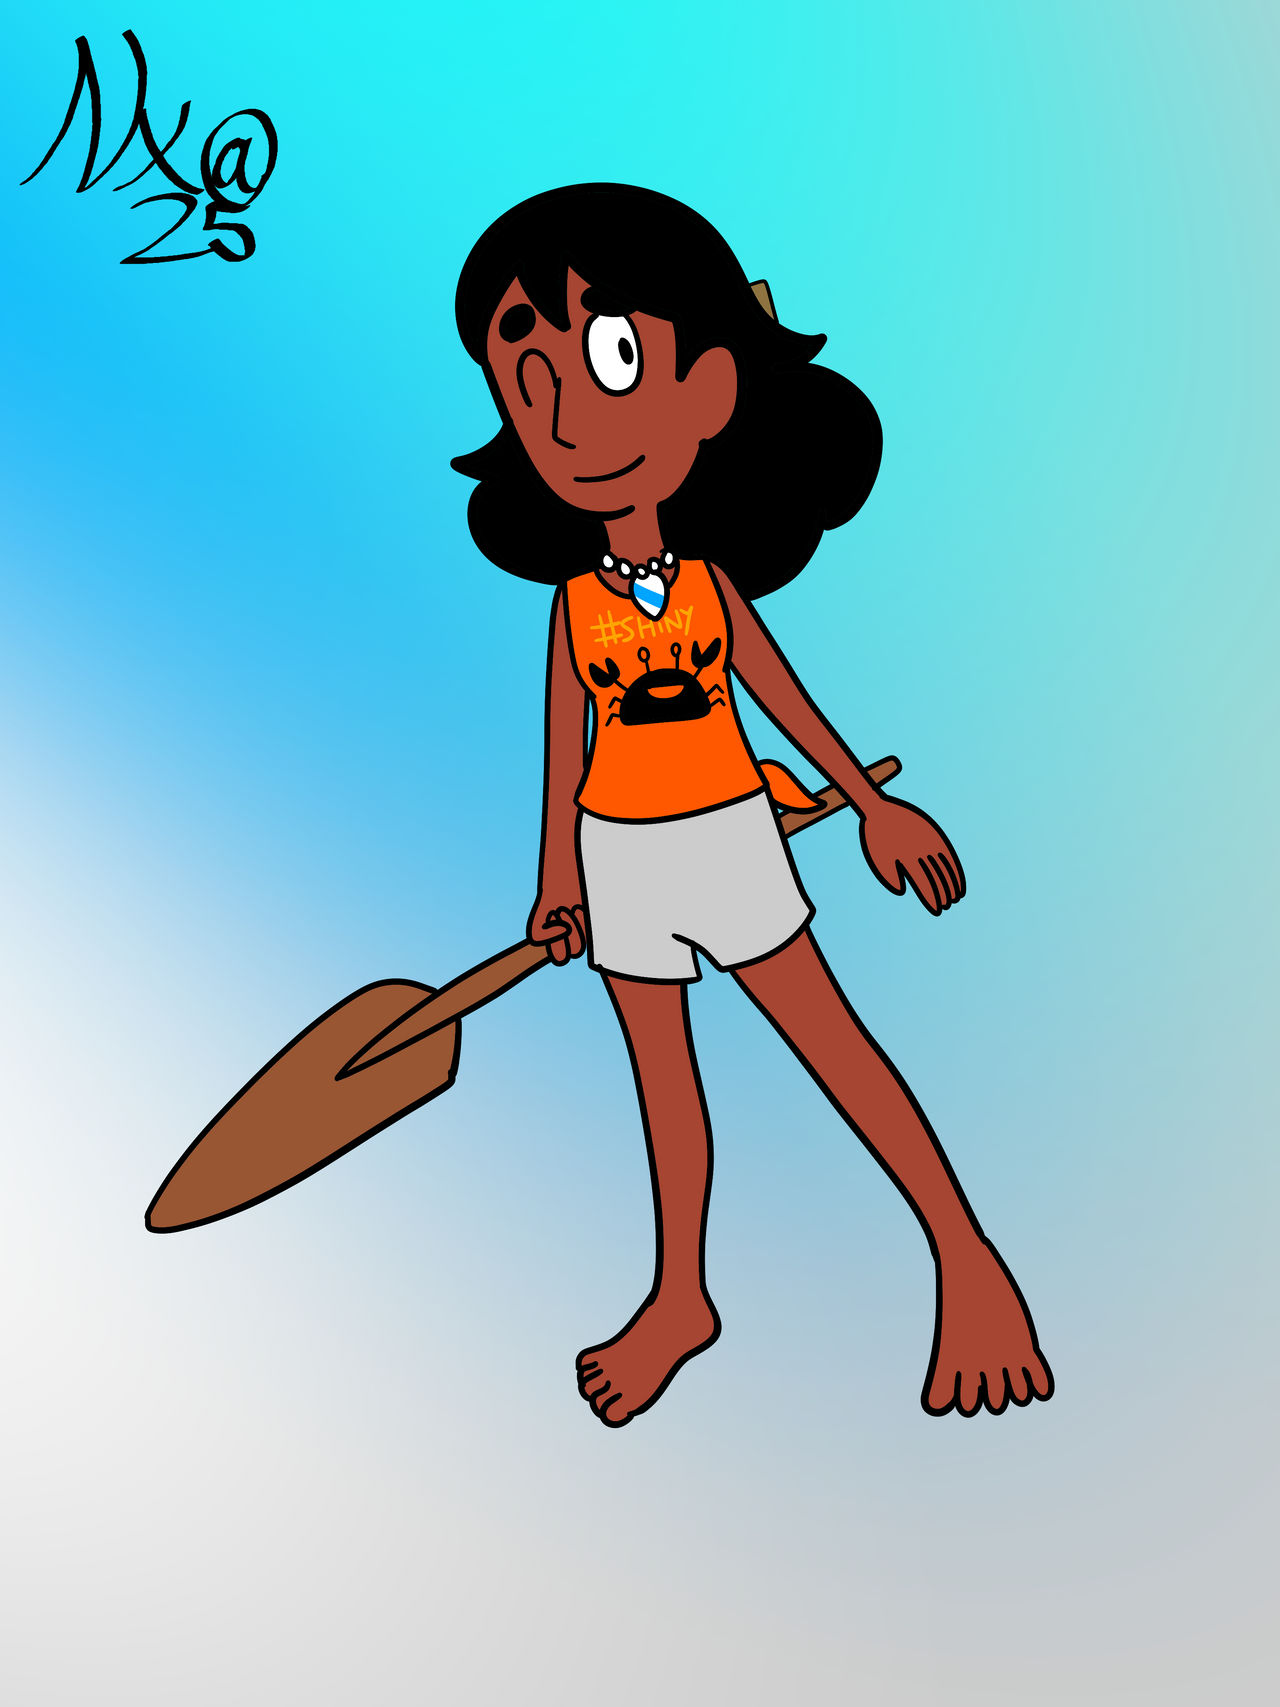 A Live Action Remake of Moana? by Trainboy452 on DeviantArt